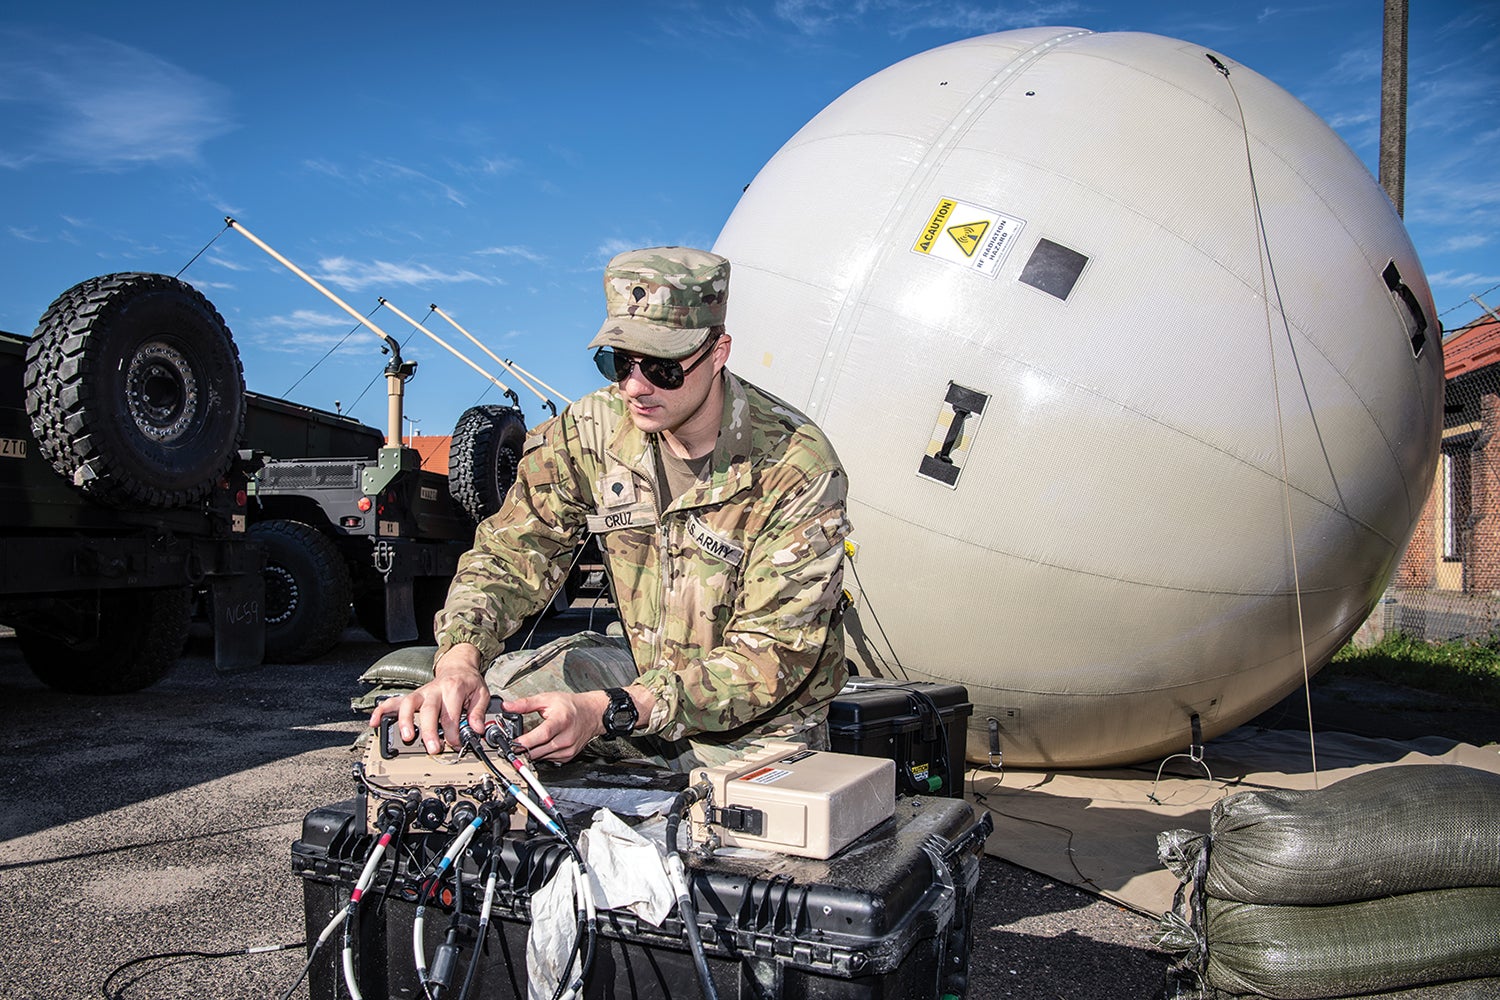 A soldier sets up a Combat Service Support Very Small Aperture Terminal for satellite communications. (Credit: Courtesy Photo)